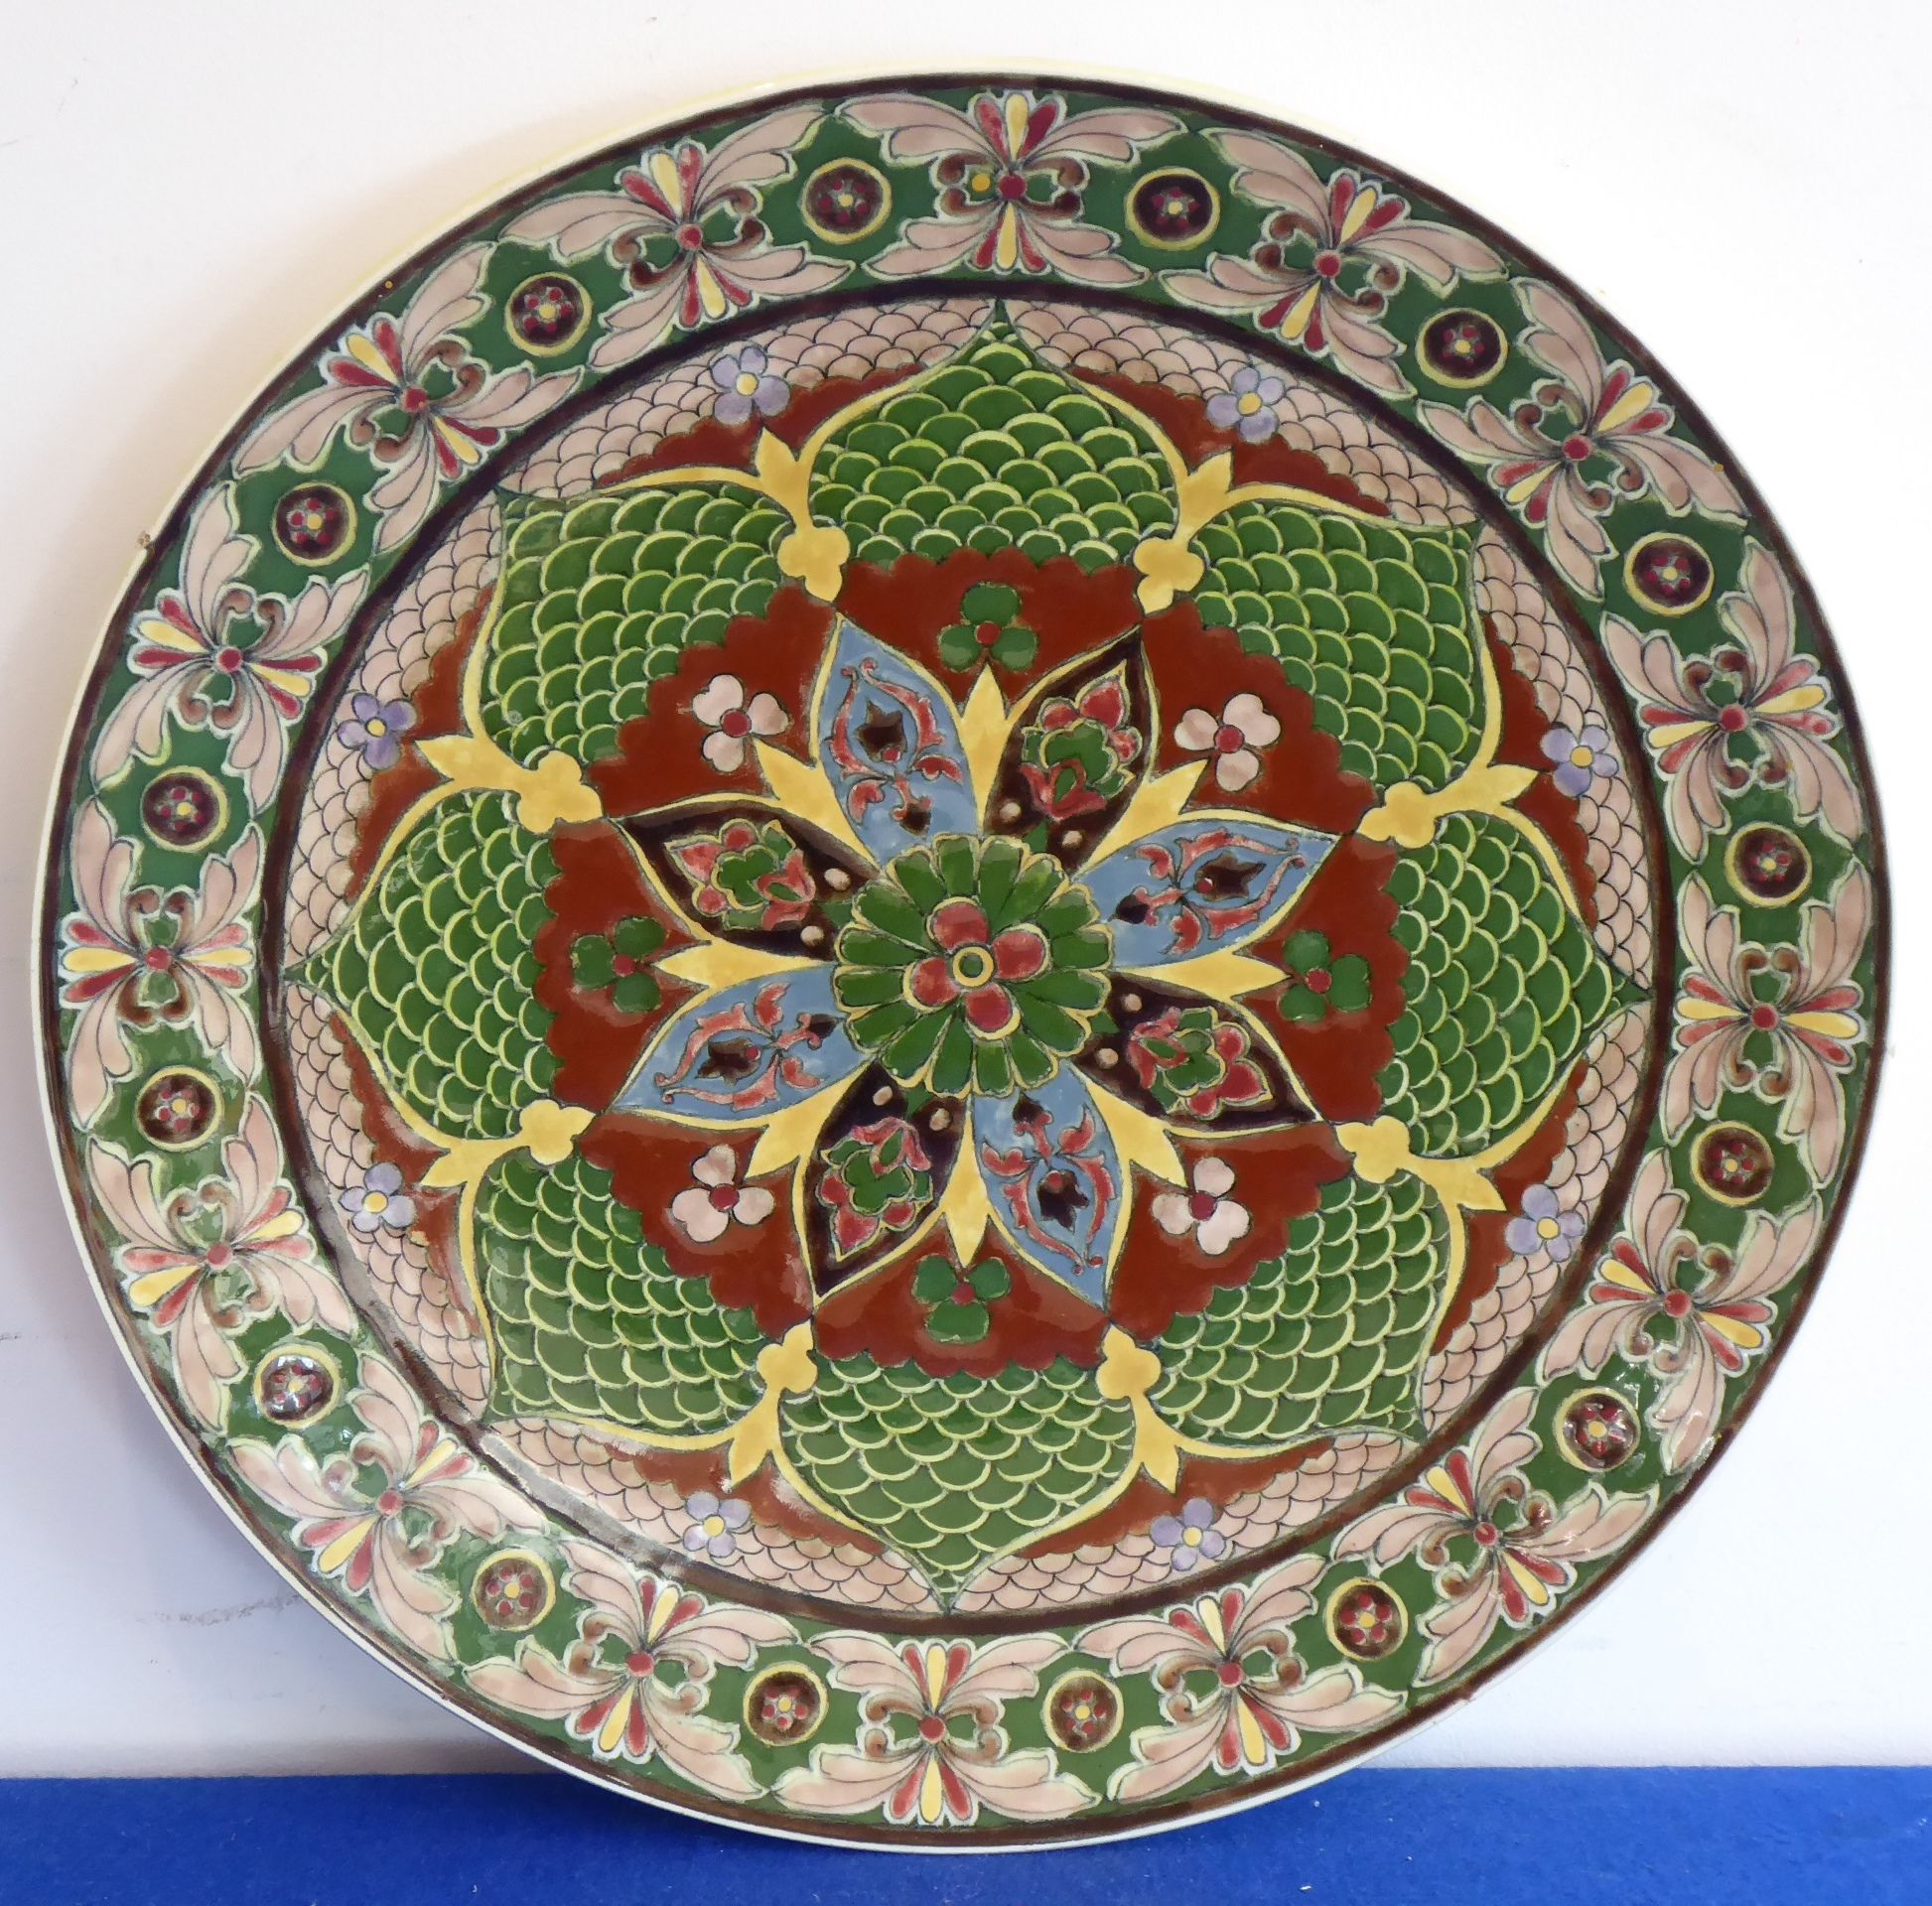 An early 20th century Royal Bonn 'Old Dutch' pattern wall hanging charger hand-decorated in enamels,